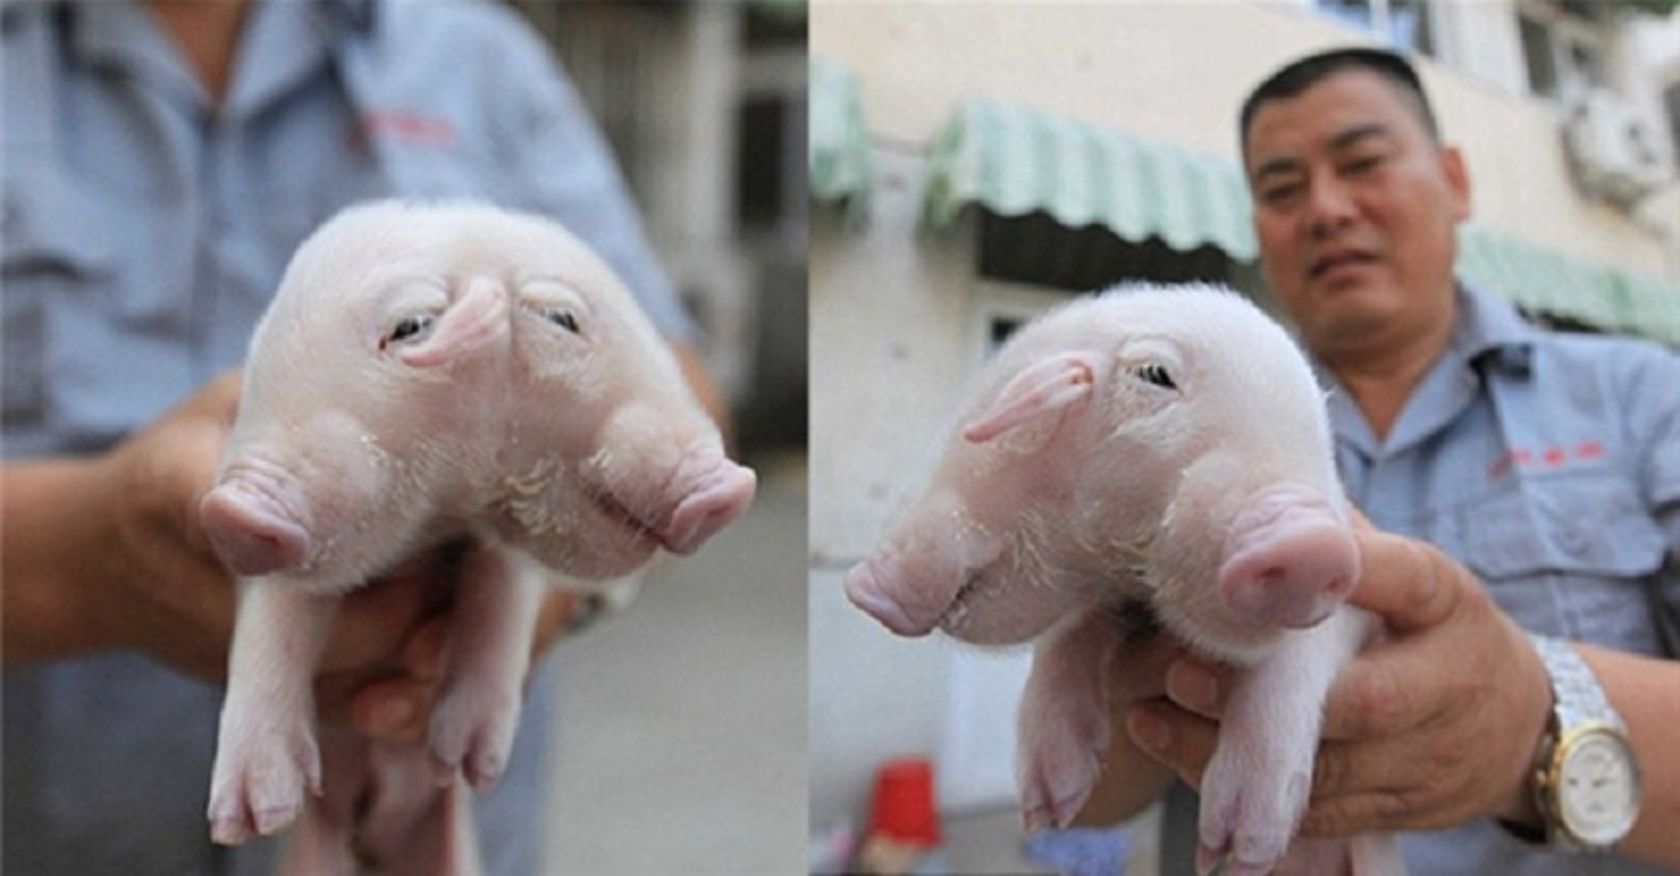 Two-headed piglet found near temple in China